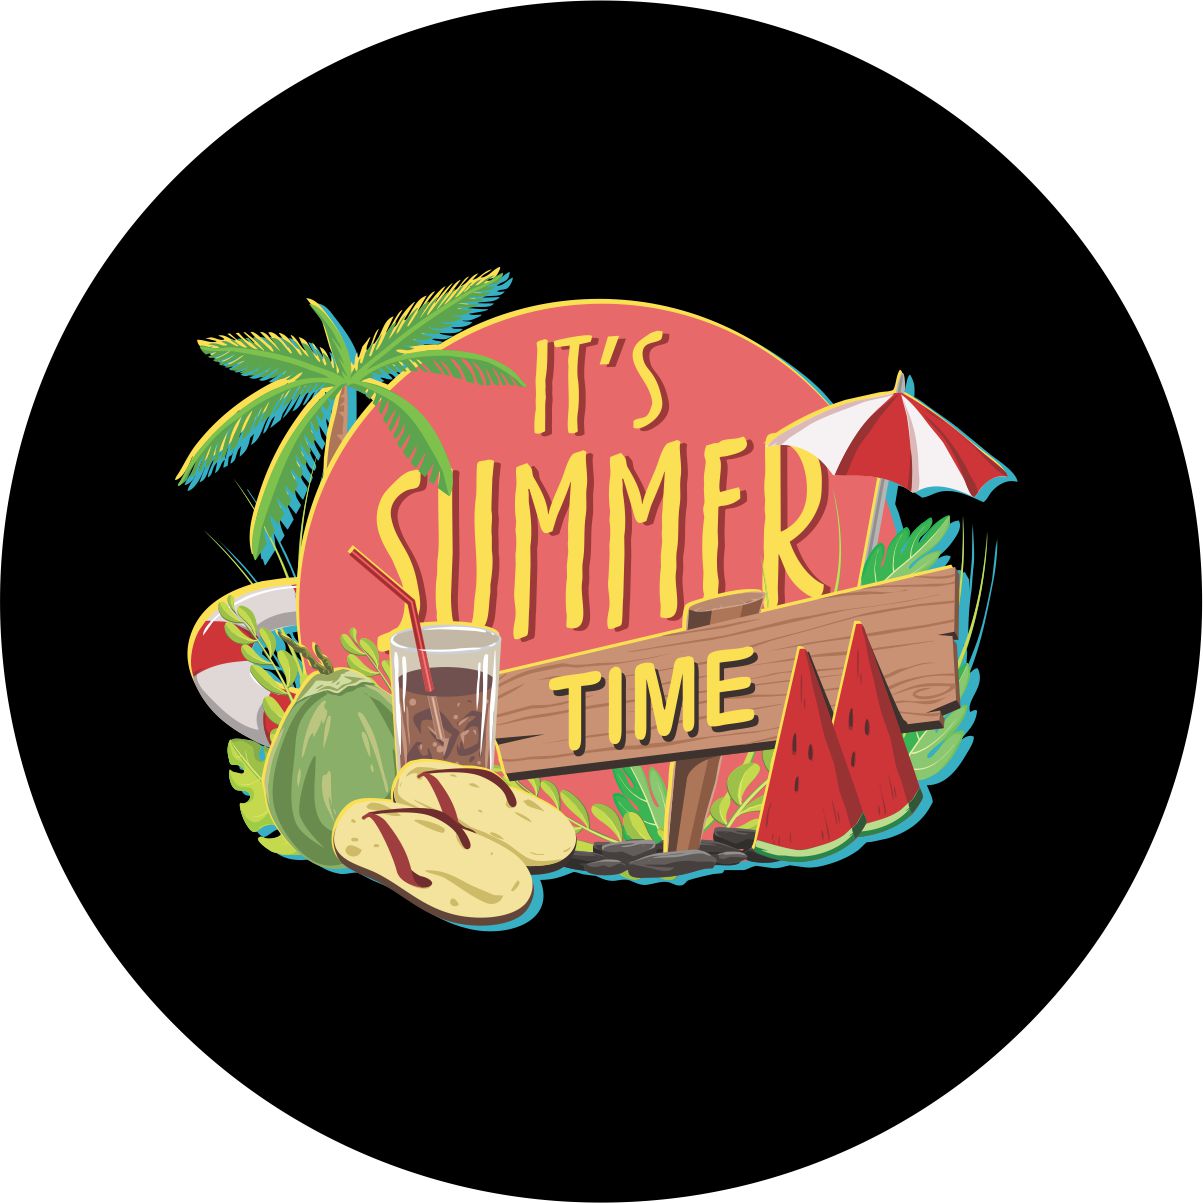 Black vinyl spare tire cover with the saying it's summer time along with all the elements of a tropical summer vacation.